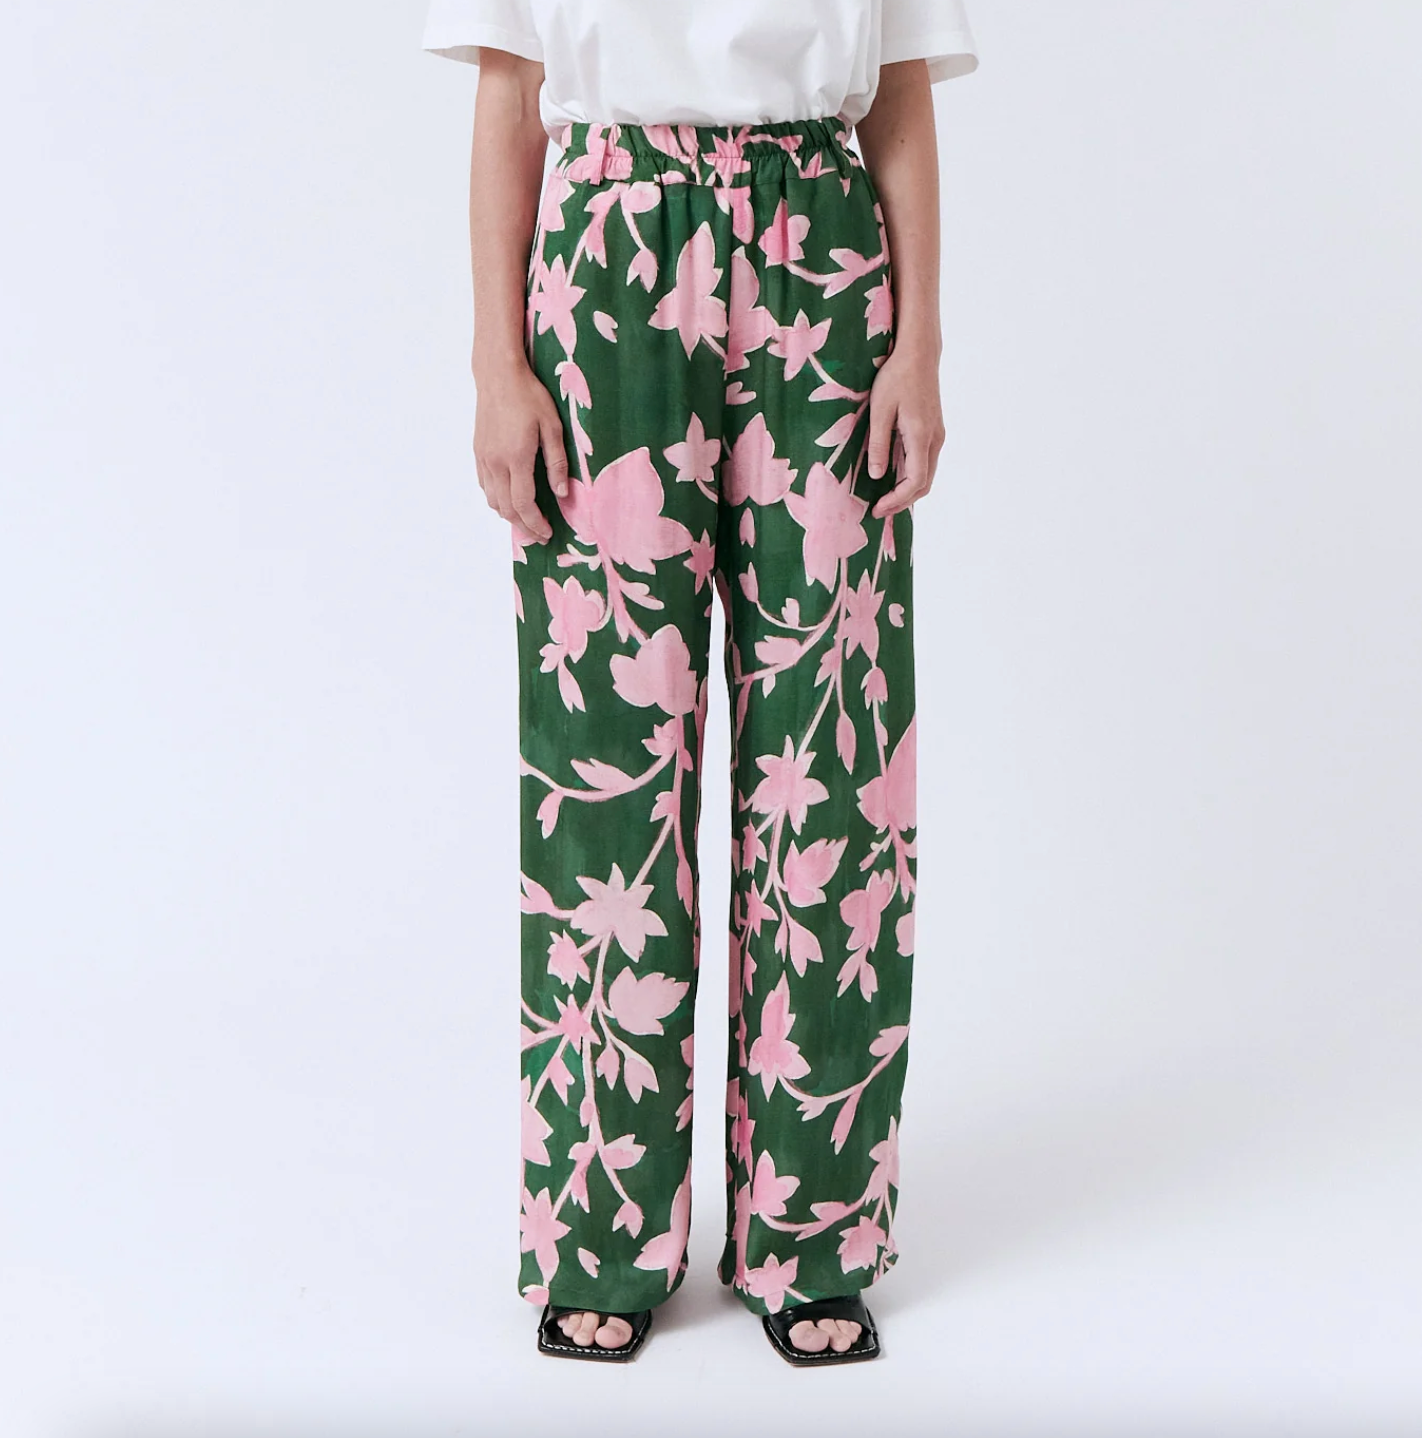 Pink & green floral print pants with elastic waistband - lightweight & perfect for Spring. 100% Ecovero Viscose - Sustainably made in Spain.